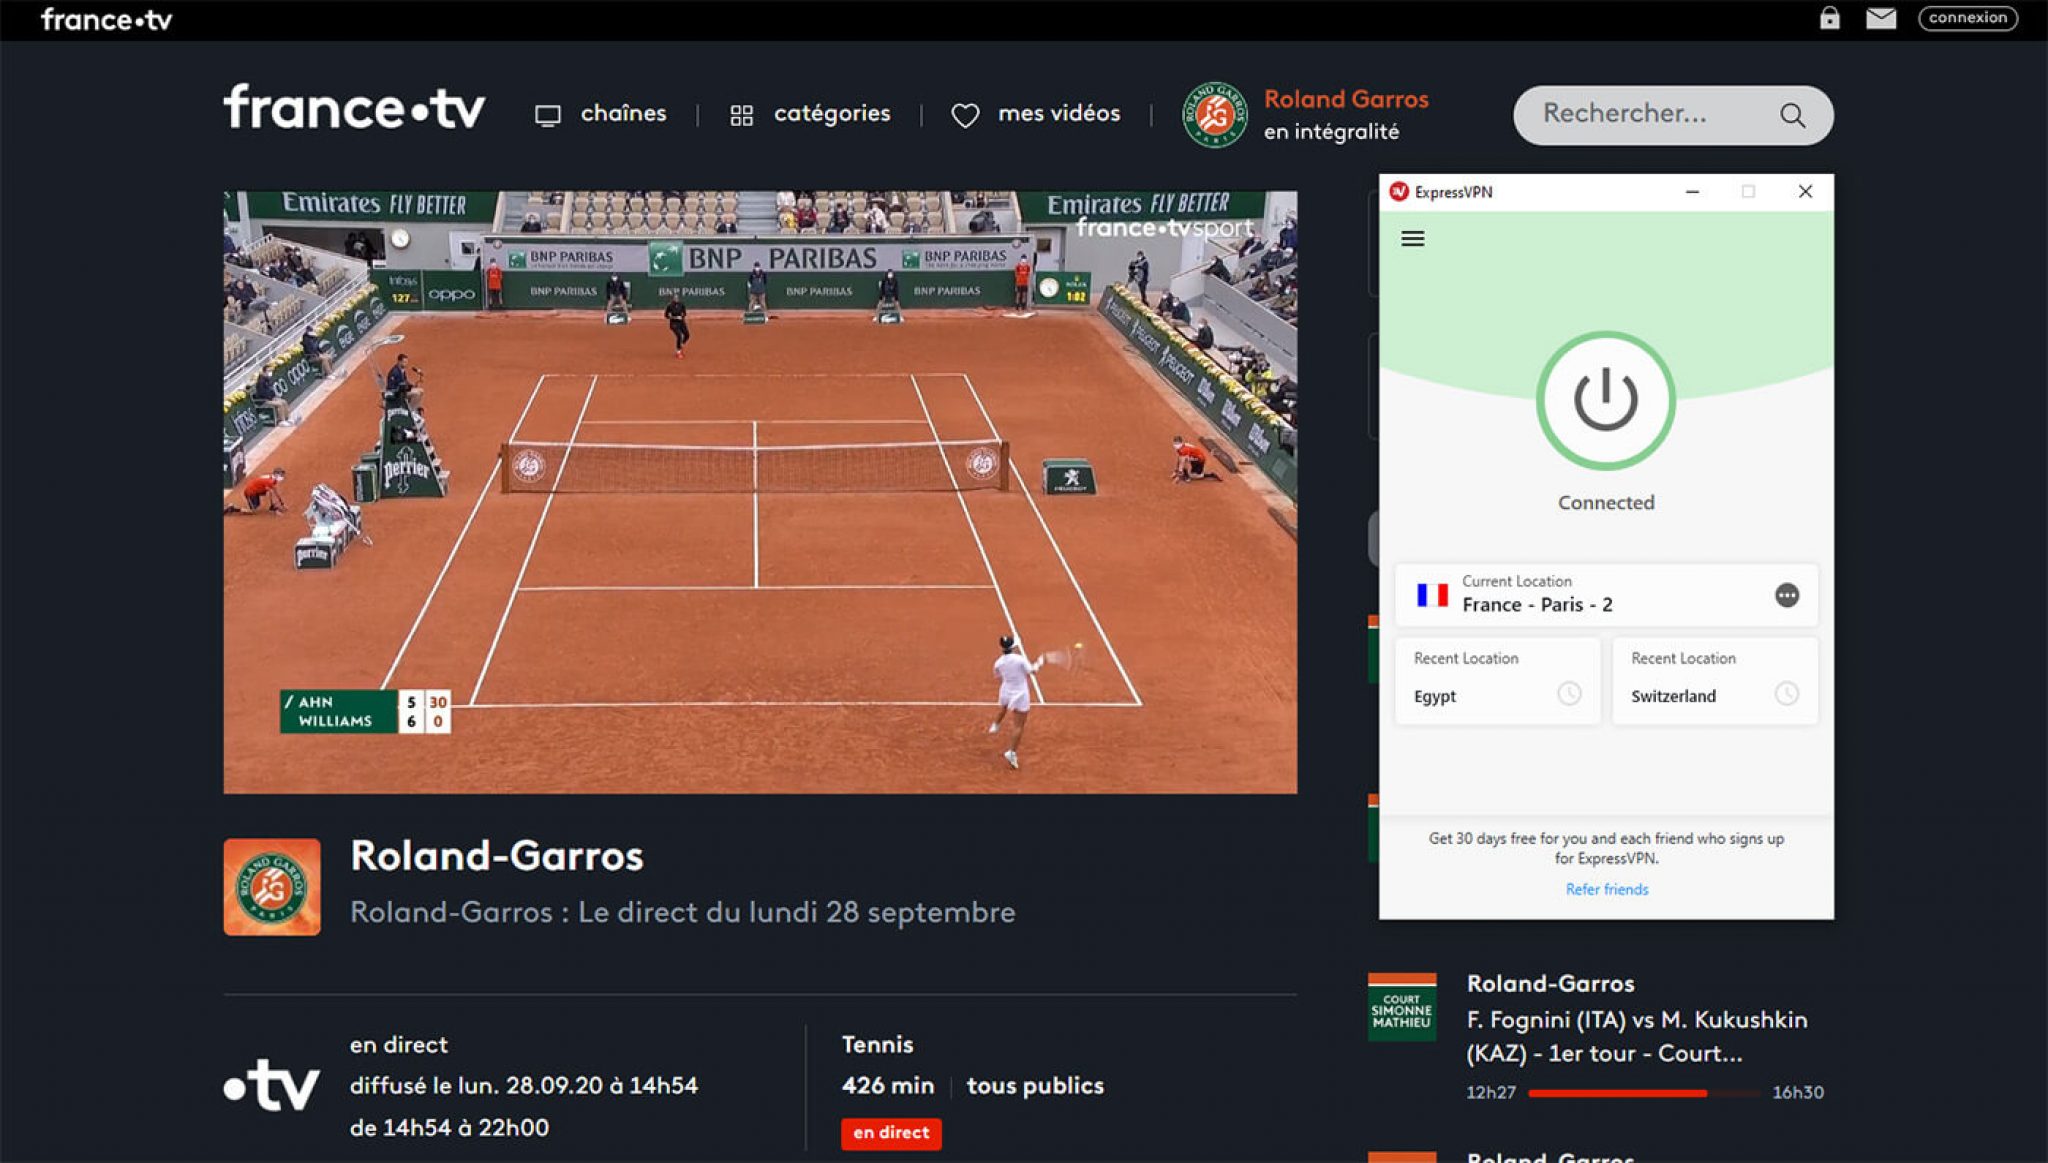 How to Watch the French Open Live? Watch It for FREE With This Trick